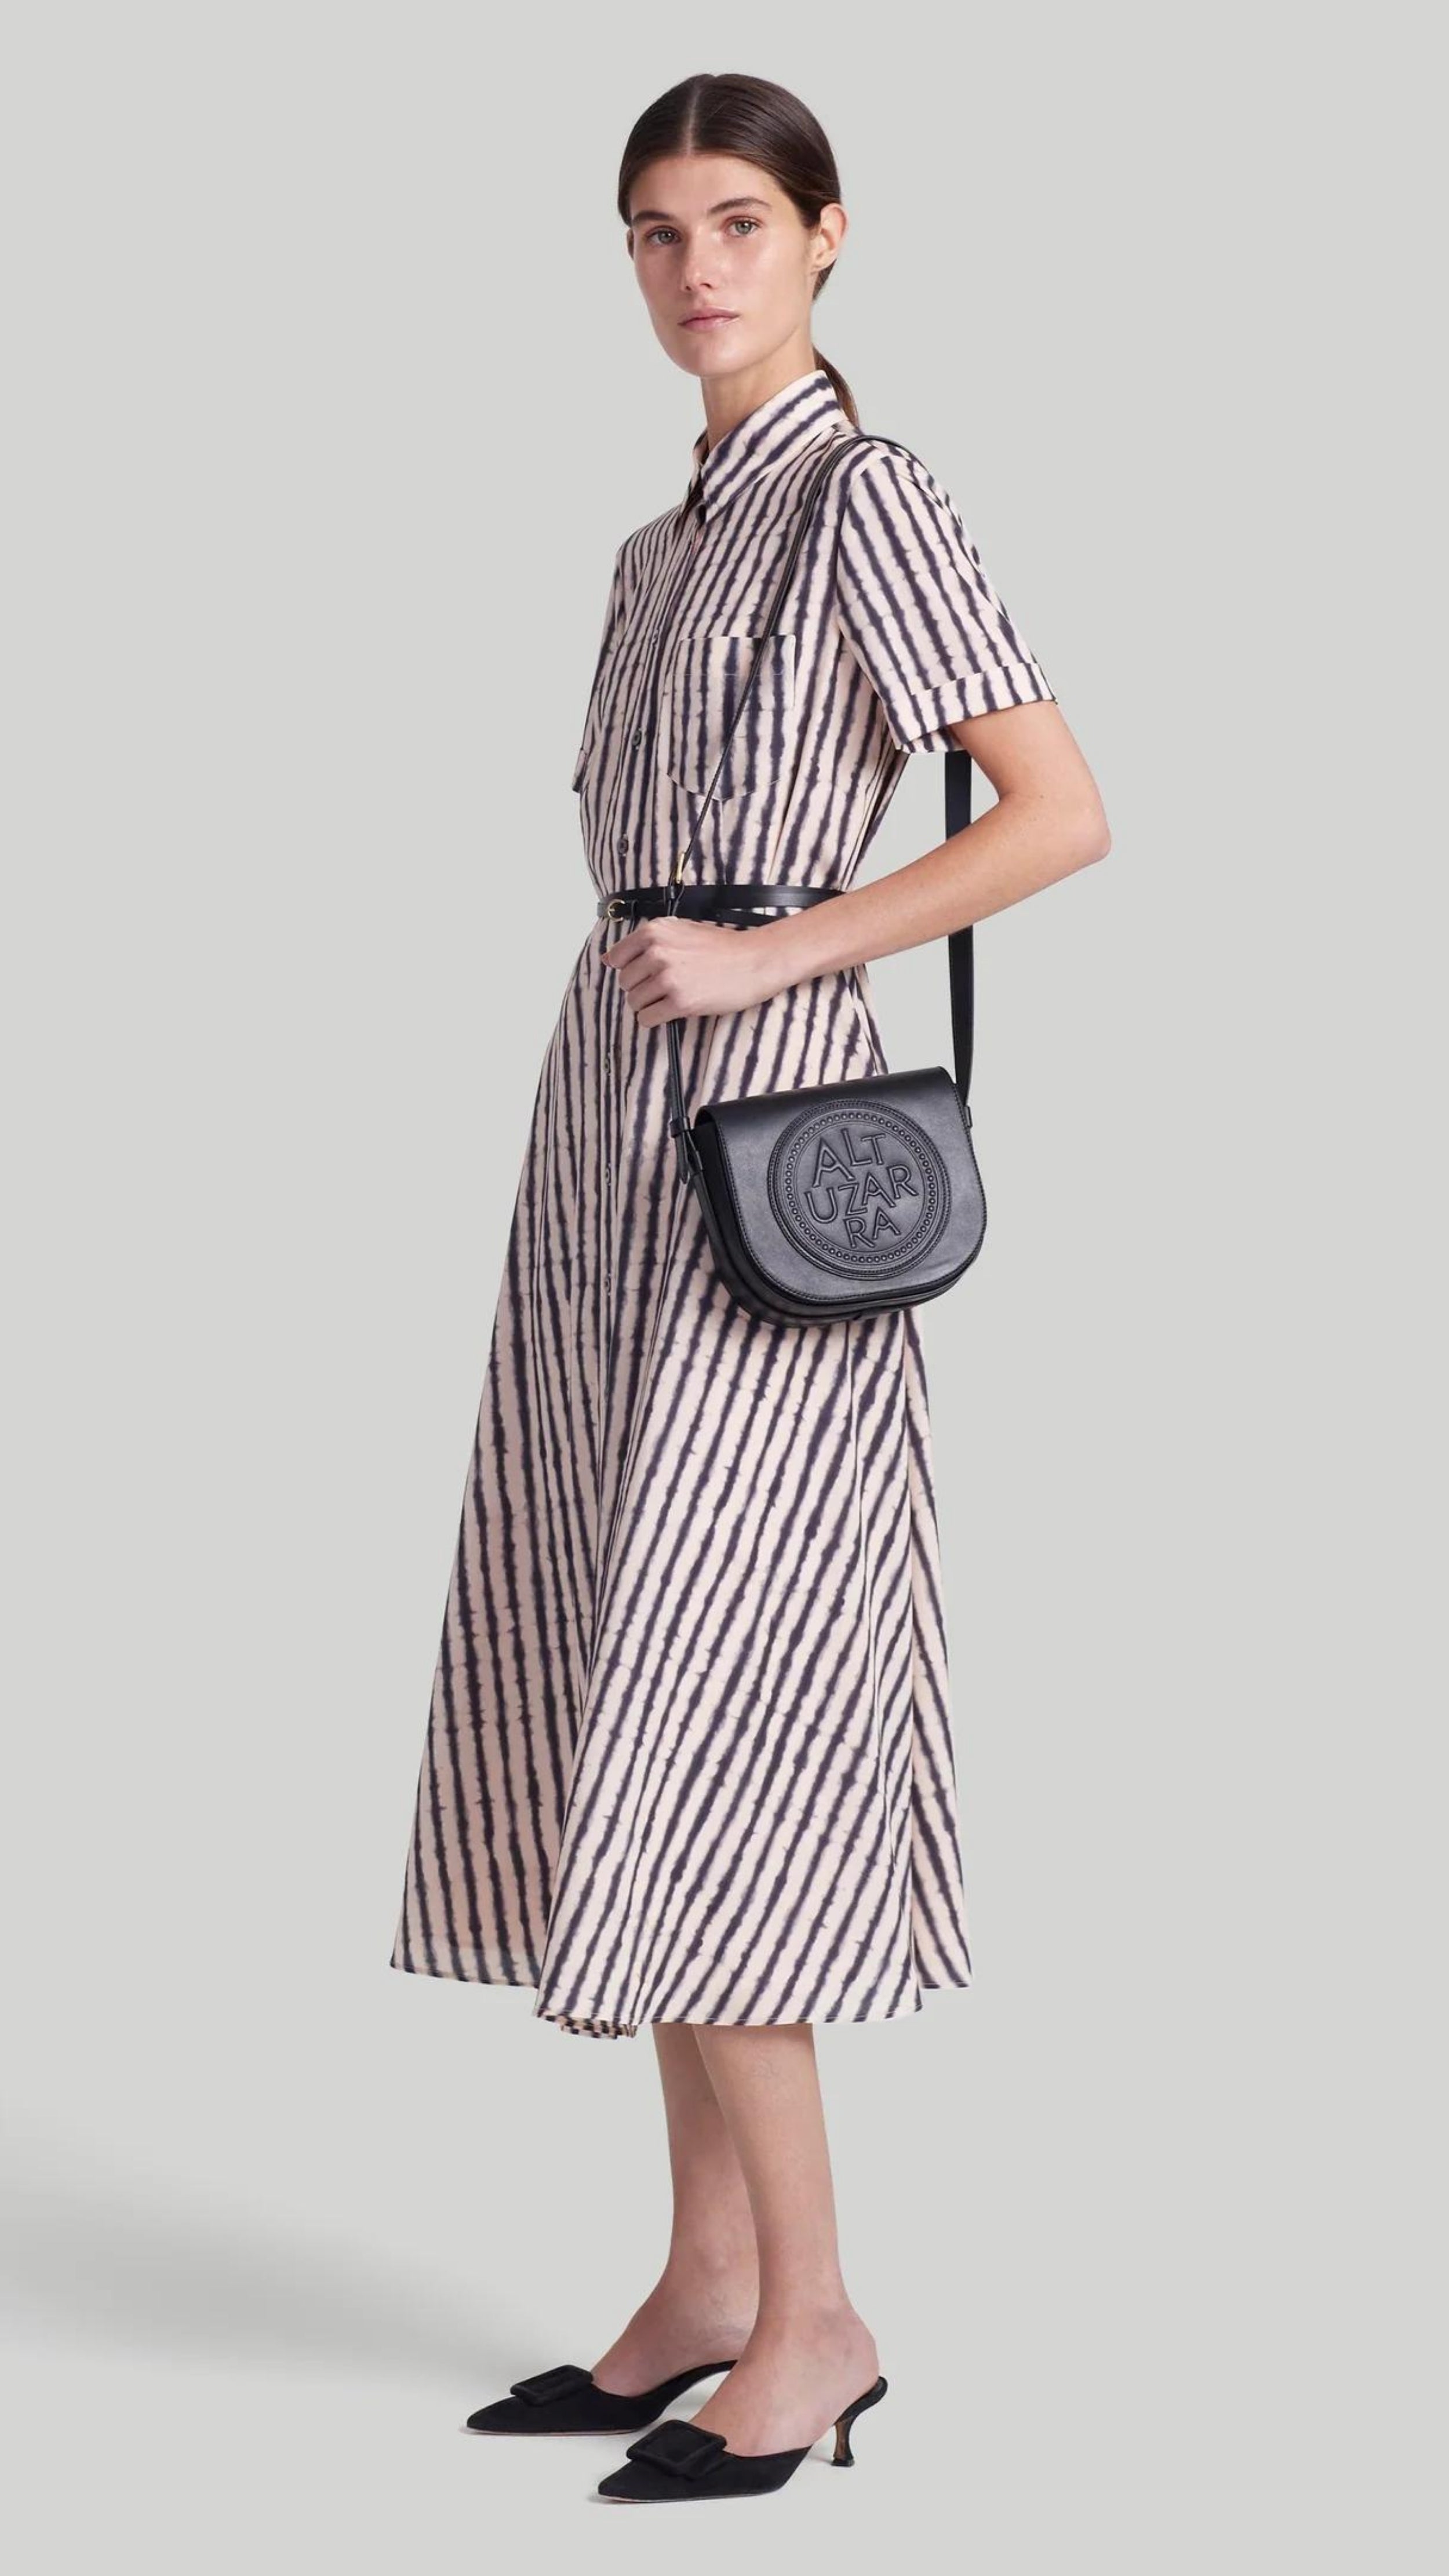 Altuzarra Kiera Dress The &#39;Kiera&#39; dress is designed with a small point collar, short sleeves and a flattering A-line skirt. It is detailed with a slim leather waist belt and features a black and white stripe pattern and a front breast pocket. Shown on model facing front and side.